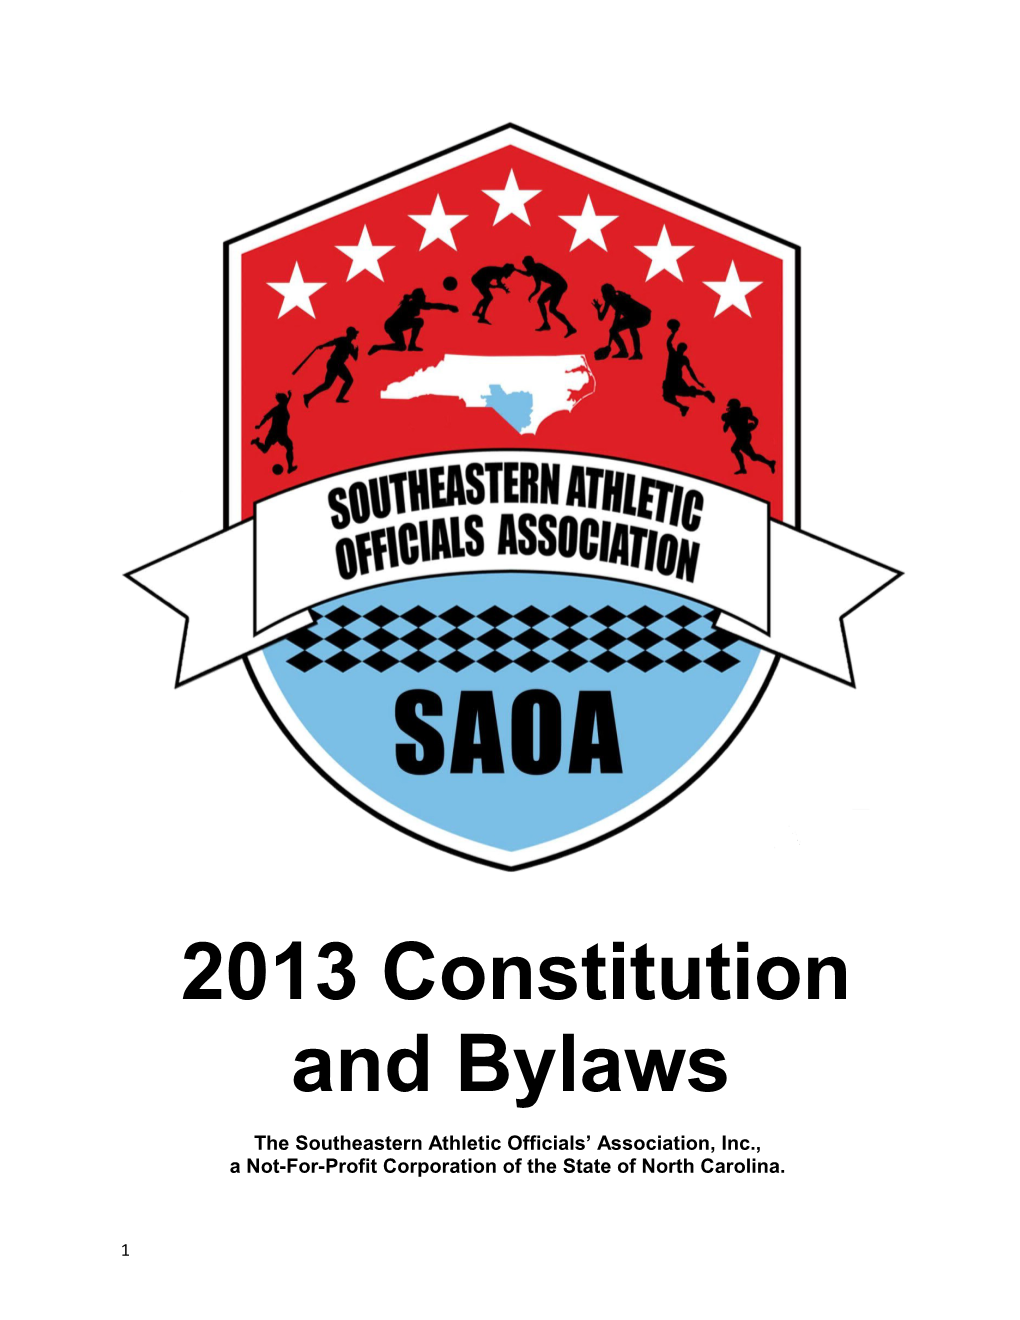 The Southeastern Athletic Officials Association, Inc., a Not-For-Profit Corporation Of